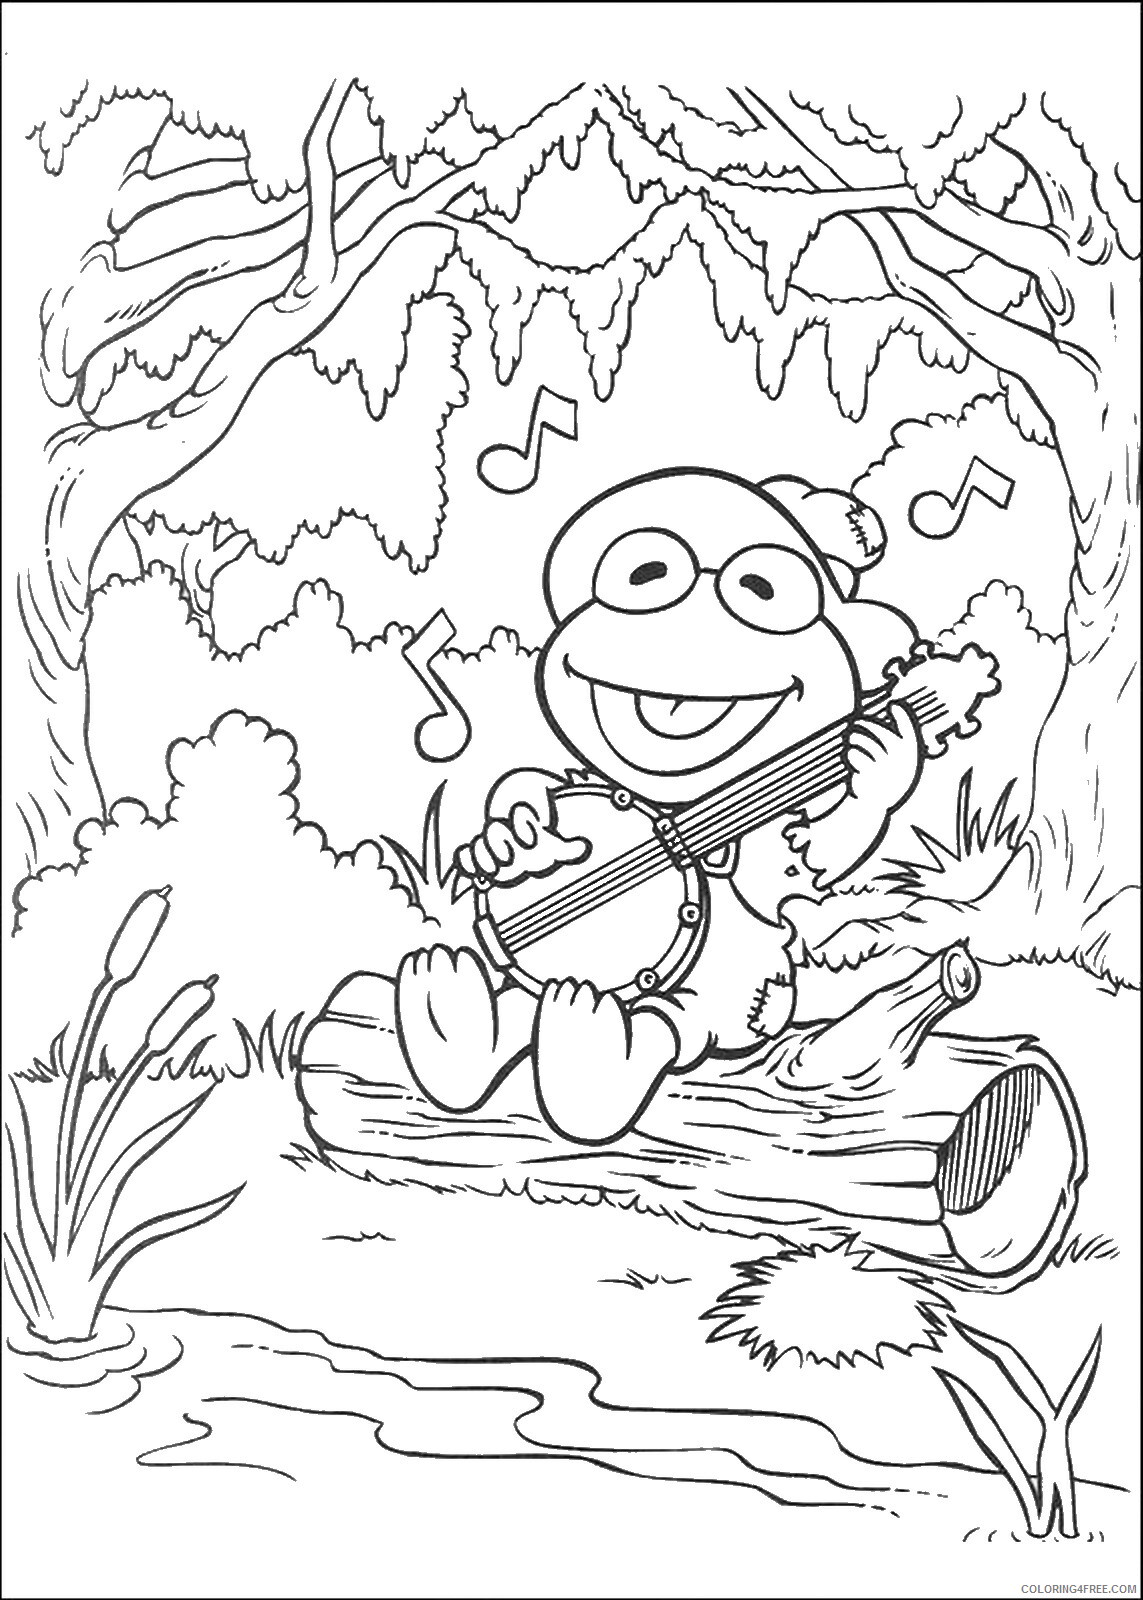 The Muppet Show Coloring Pages TV Film muppets_cl_12 Printable 2020 09371 Coloring4free